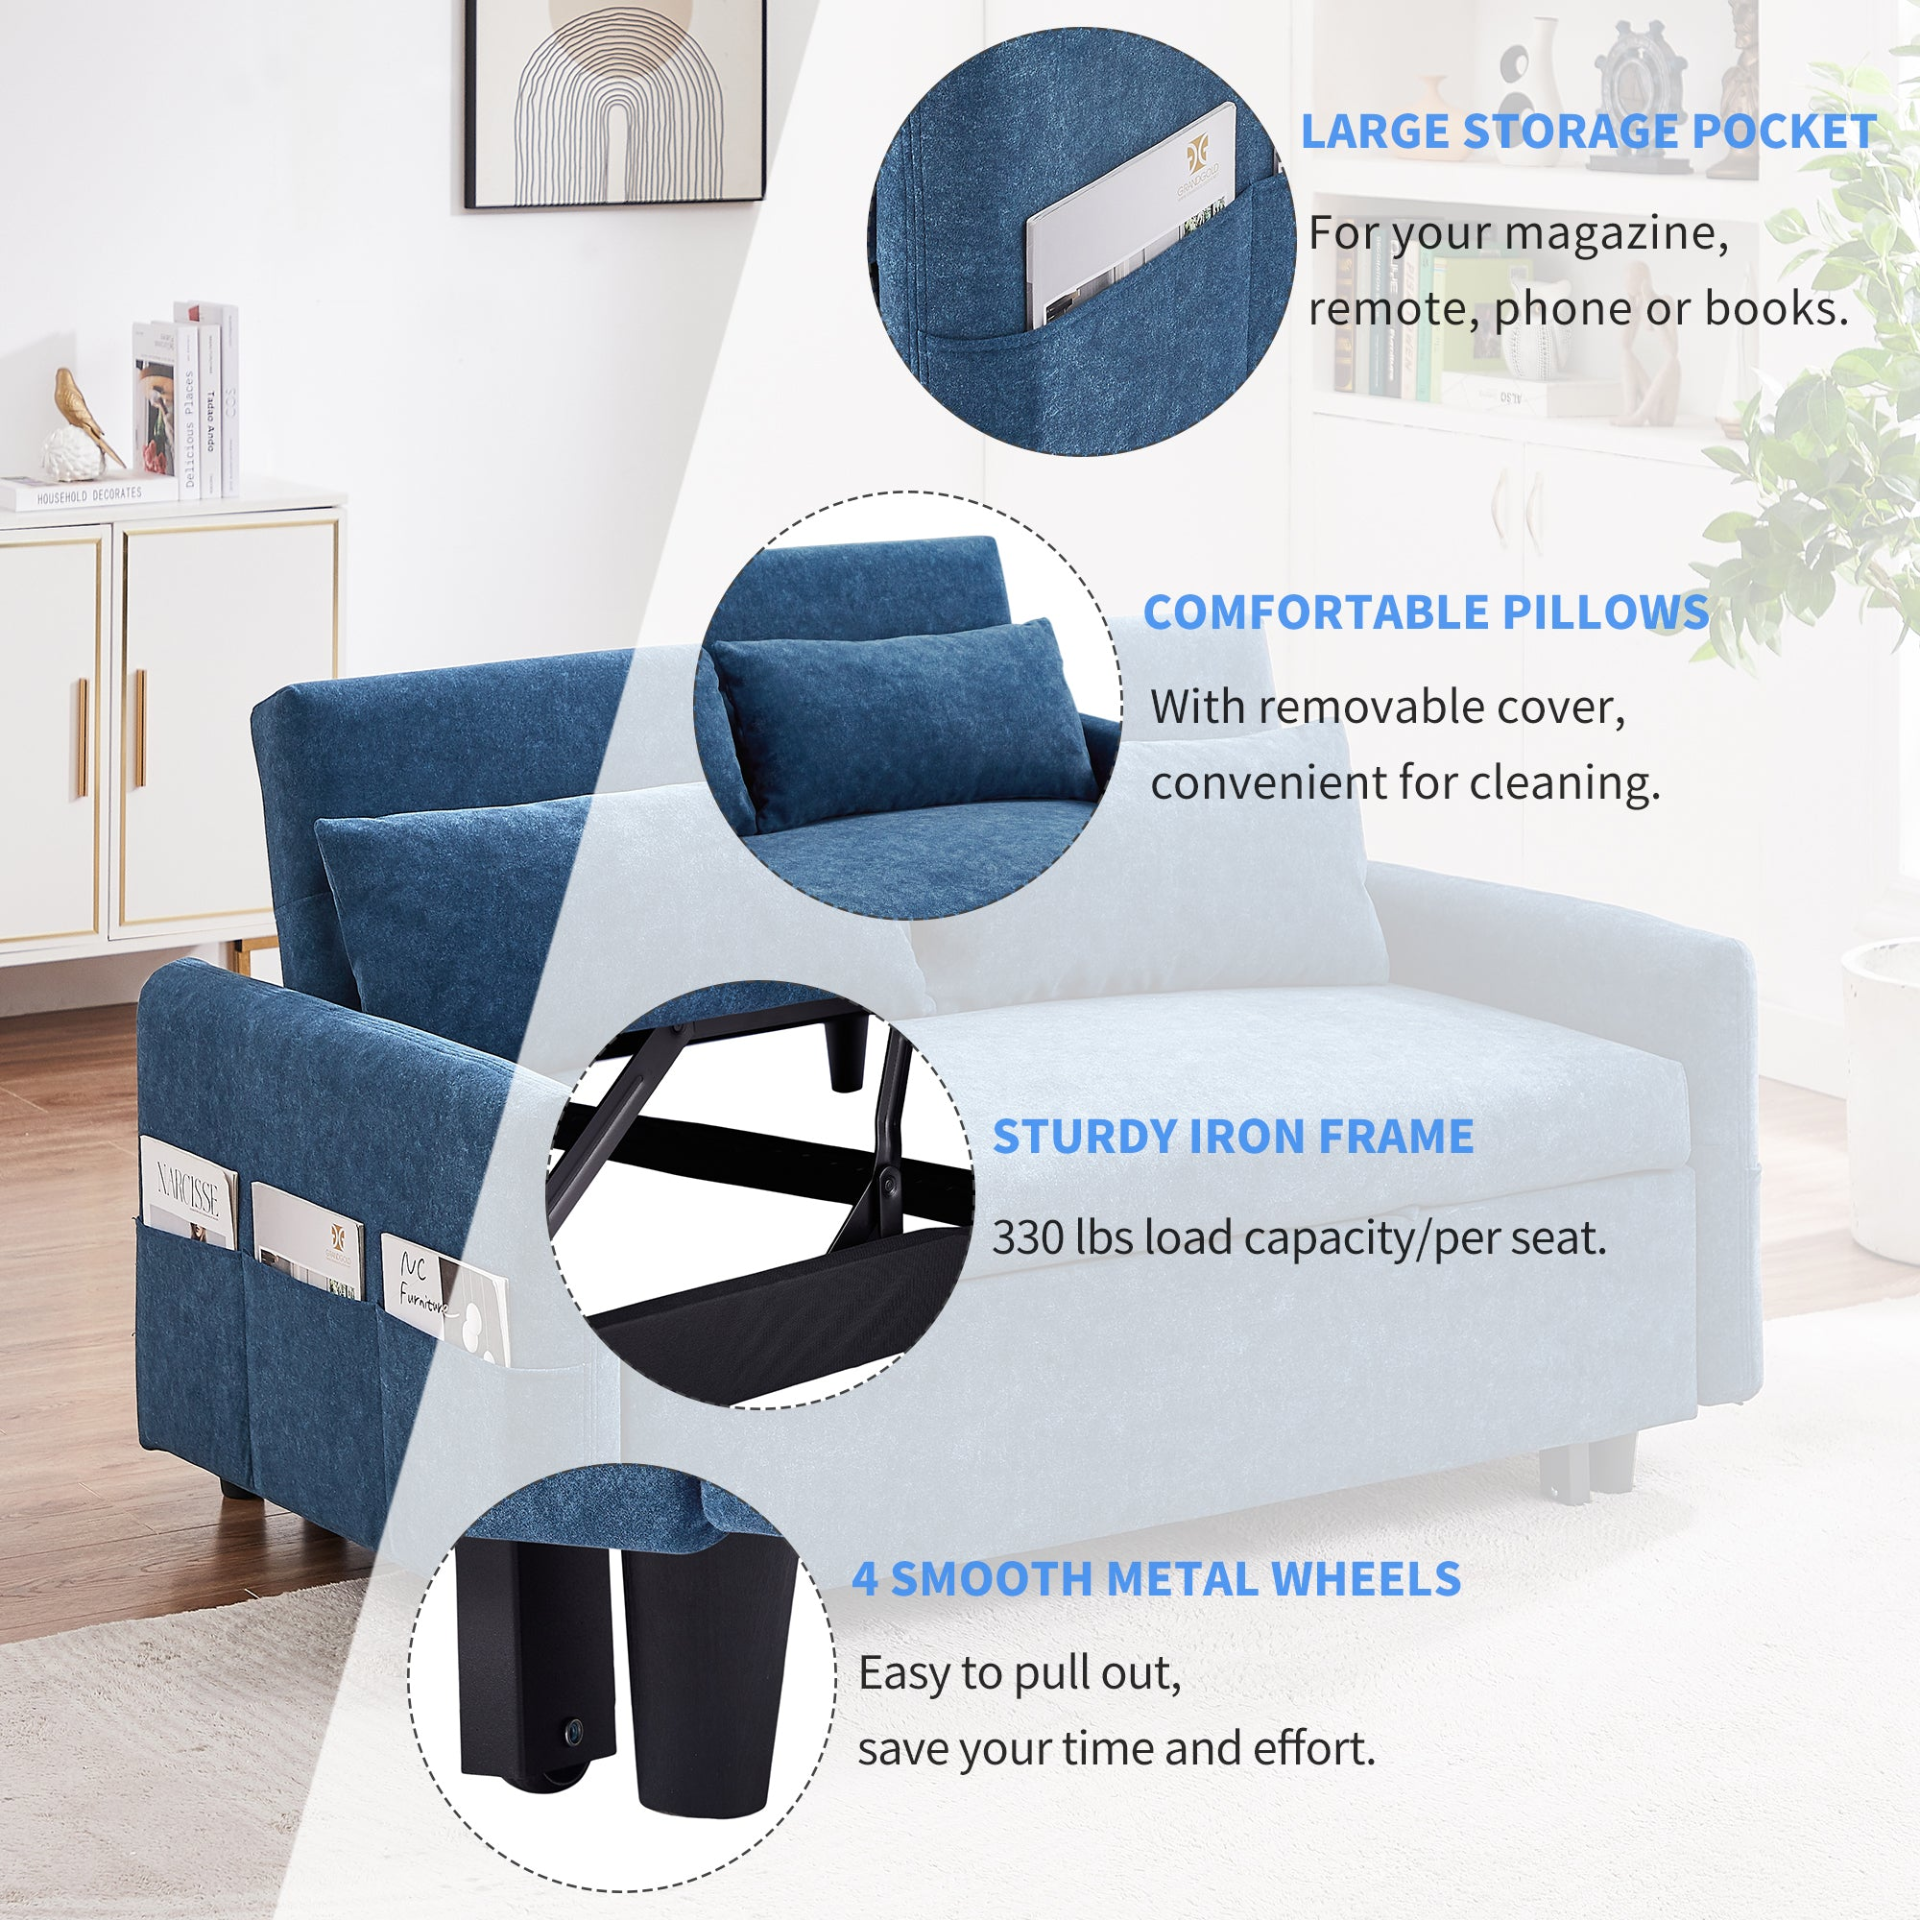 Blue - Urban Chic Loveseat Style Sofa Bed with Adjustable Backrest and USB Ports (55")